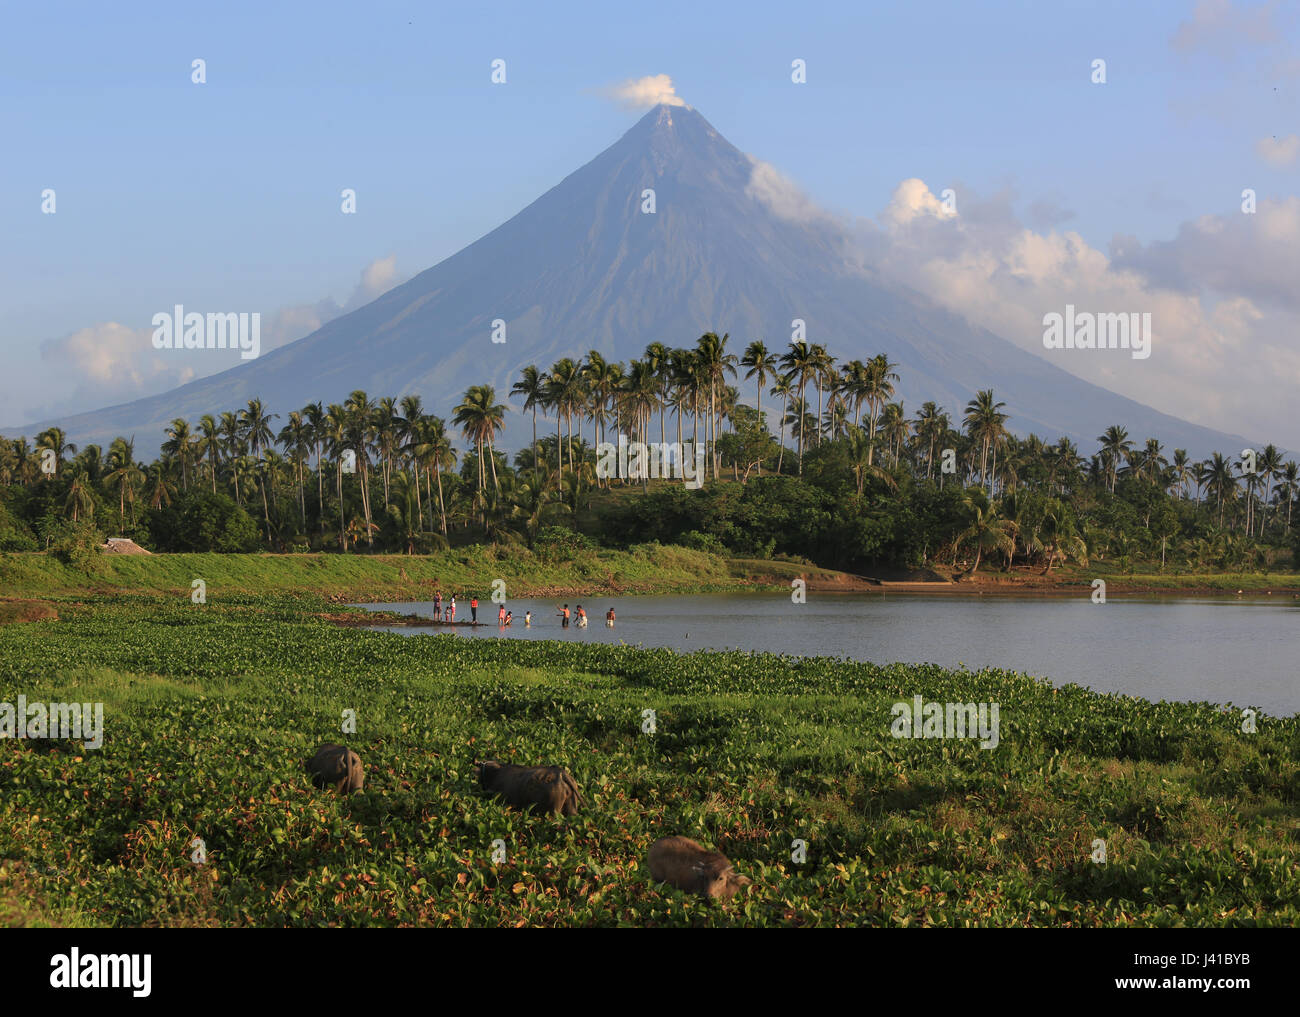 People bathing in a lake, Mayon volcano in the background, Legazpi, Philippines, Asia Stock Photo